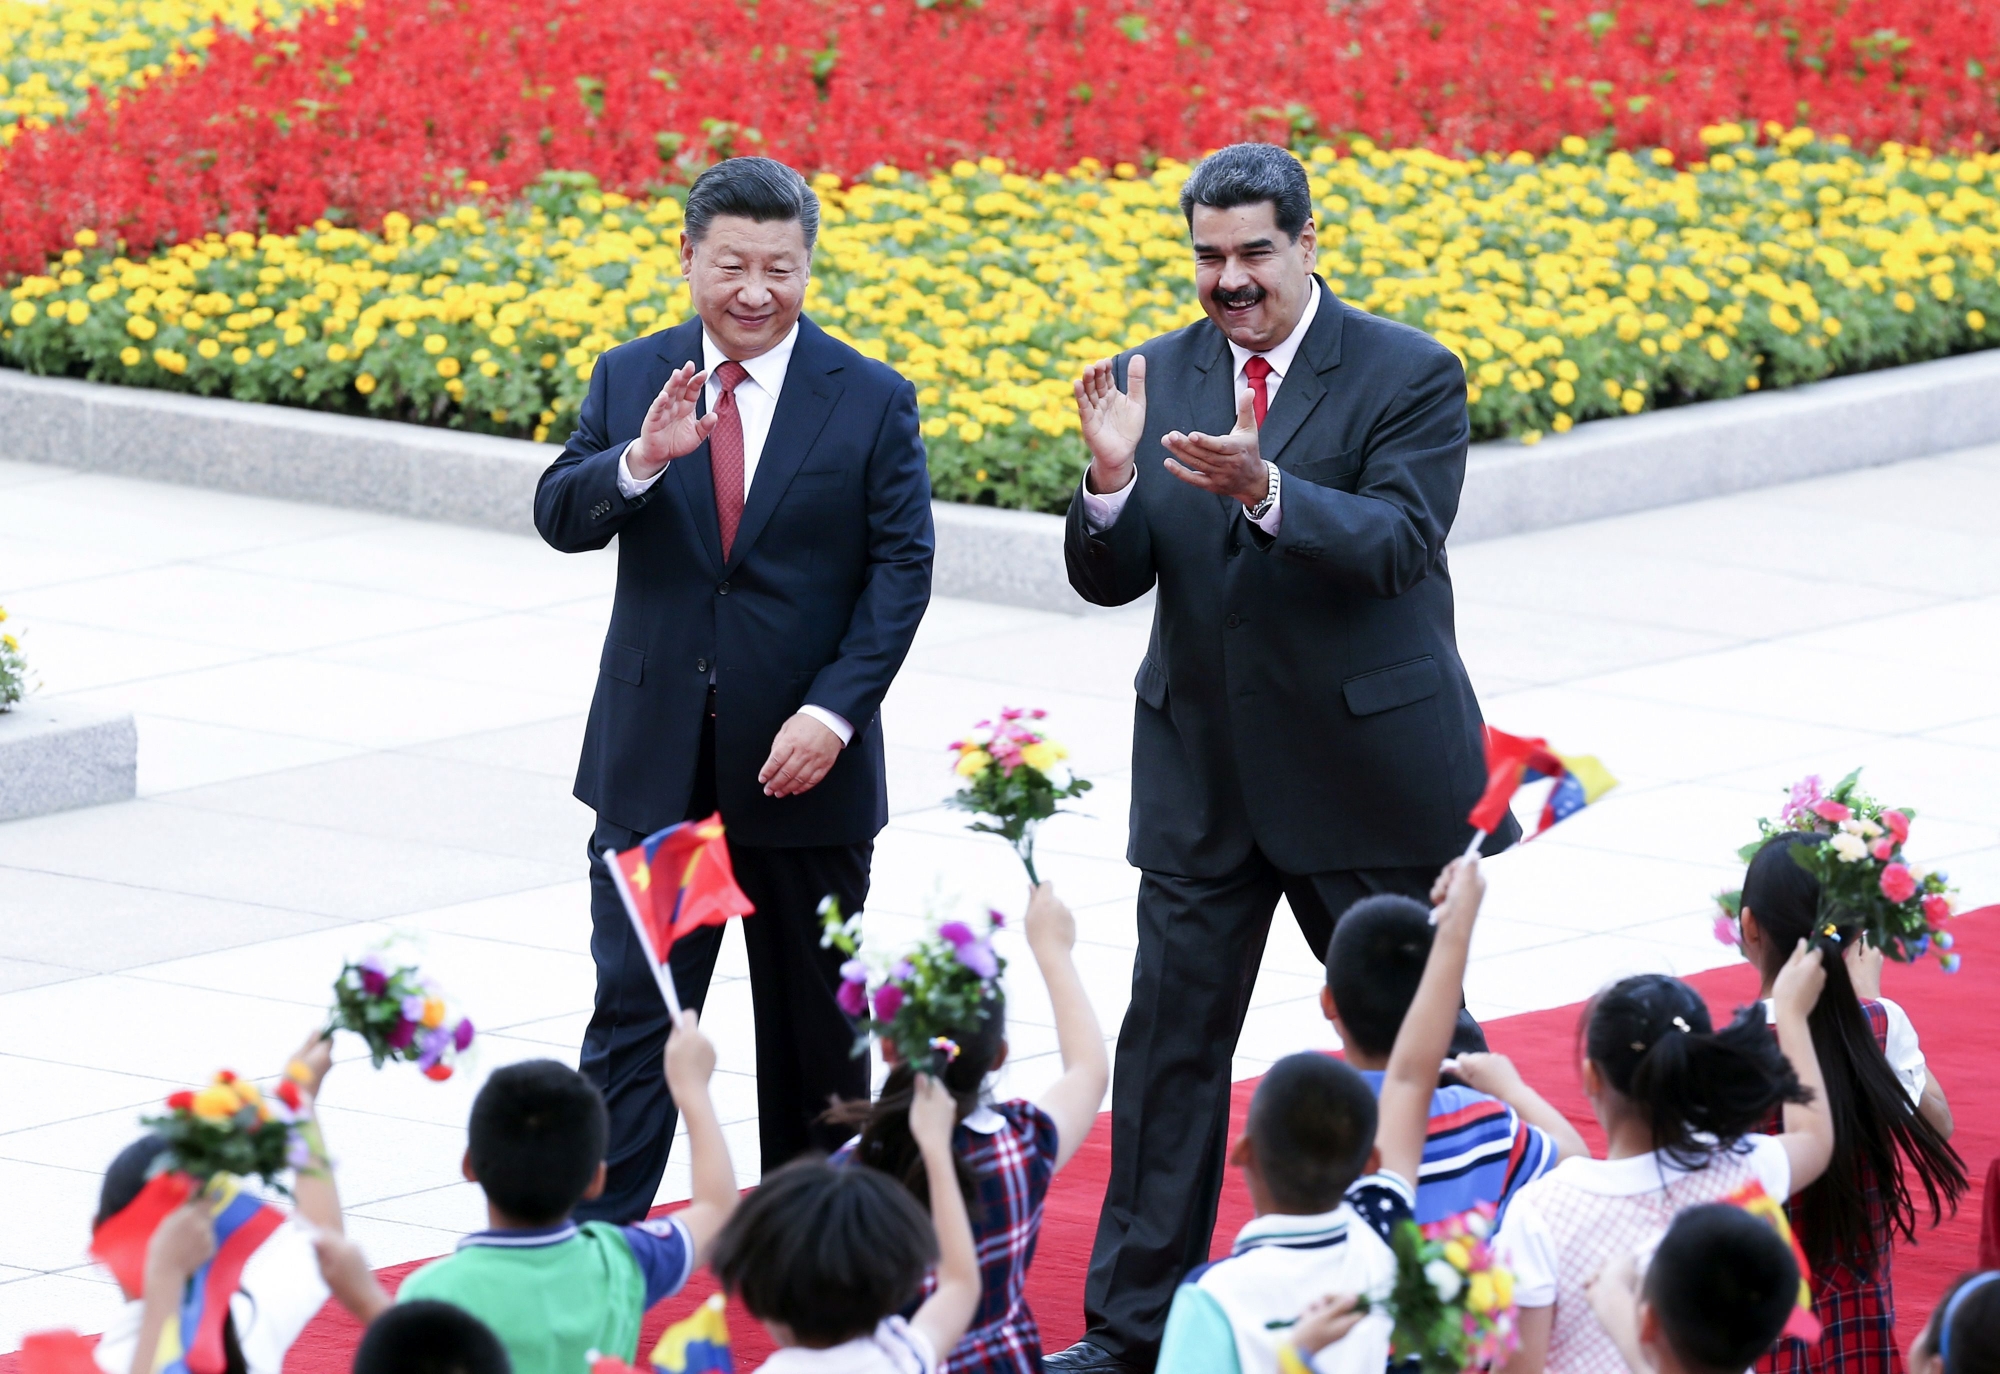 In this Friday, Sept. 14, 2018, photo released by China's Xinhua News Agency, Chinese President Xi Jinping, left, and Venezuela's President Nicolas Maduro react during a welcome ceremony in Beijing. Venezuelan President Nicolas Maduro met Friday with Chinese President Xi Jinping during a trip to deepen ties and seek increased financial support from one of his ailing country's biggest creditors. (Yao Dawei/Xinhua via AP) China Venezuela